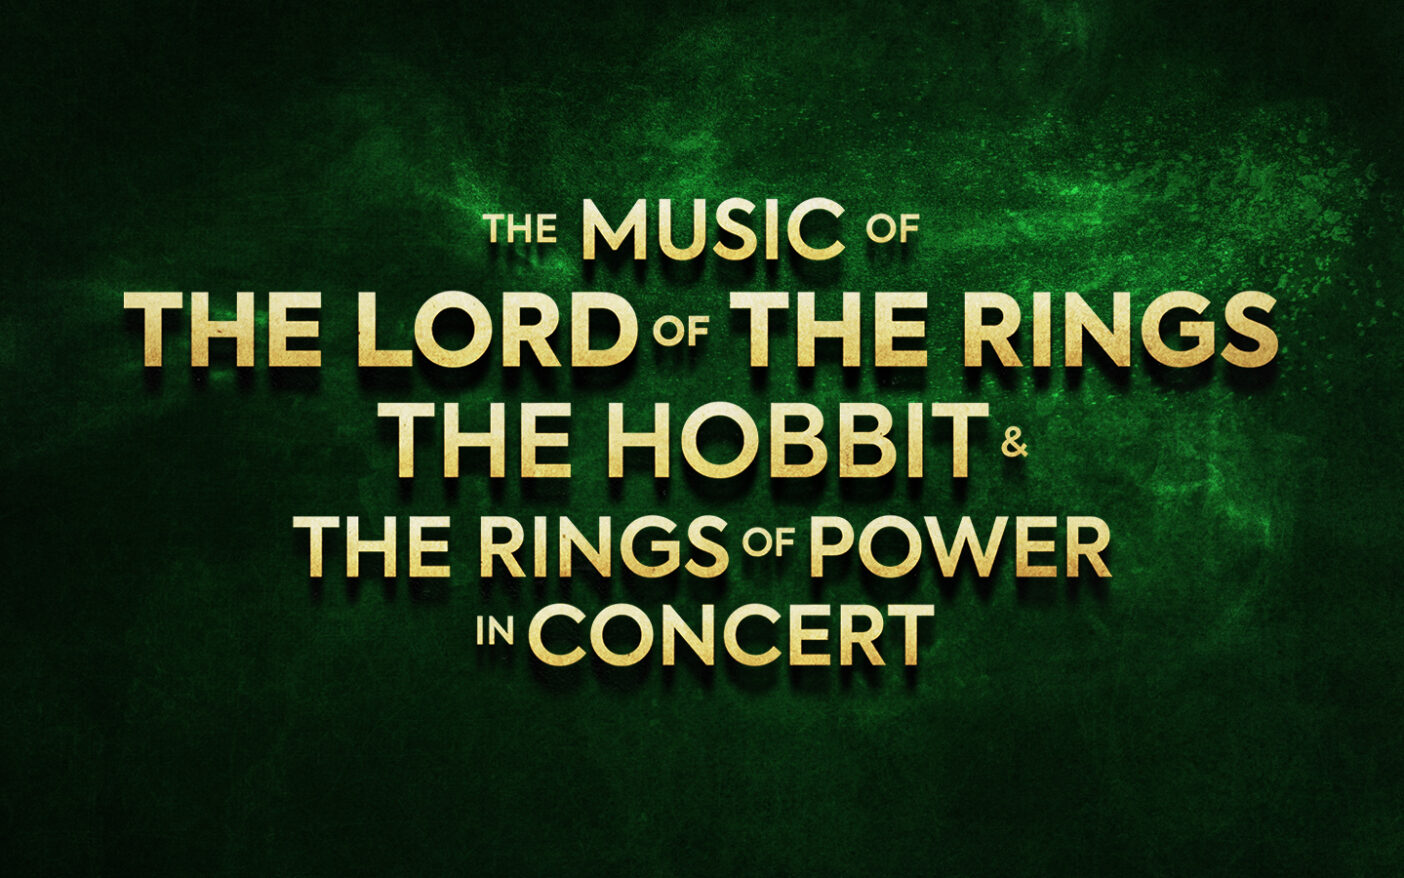 The Music of Lord of the Rings, The Hobbit and Rings of Power-in concert